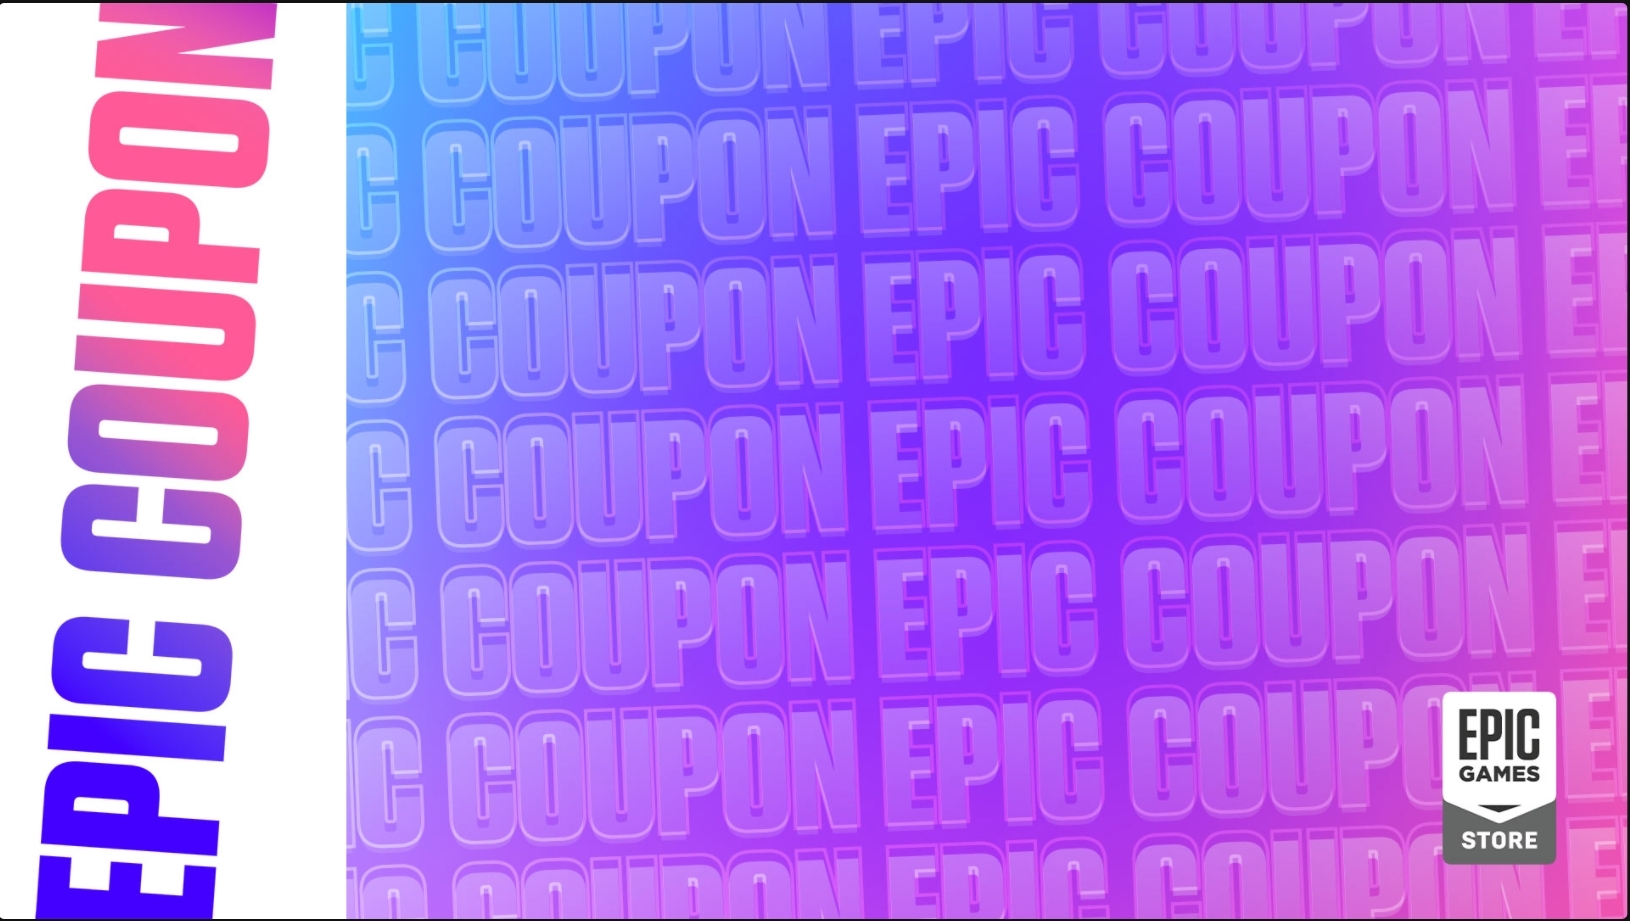 Epic Games Coupon: Any Eligible PC Digital Game $15+ $10 Off (1/27-2/27)